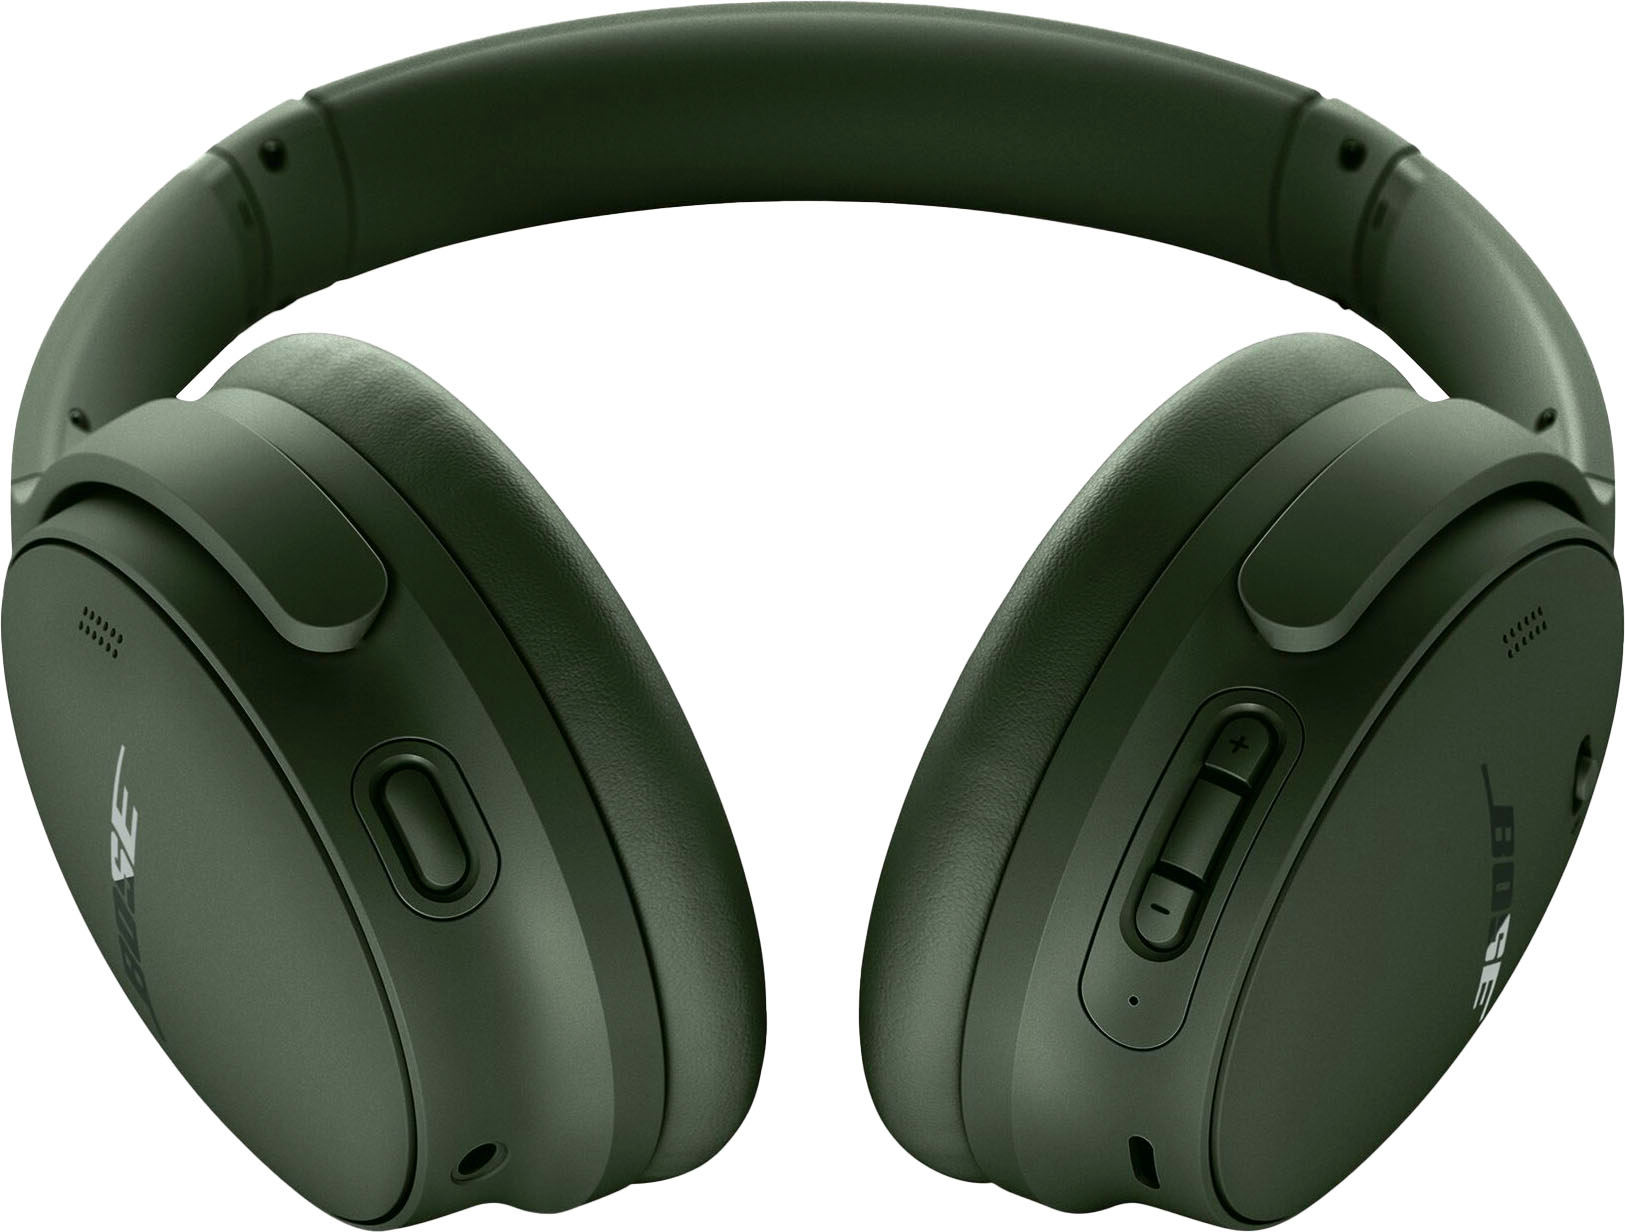 Angle View: Bose - QuietComfort Wireless Noise Cancelling Over-the-Ear Headphones - Cypress Green